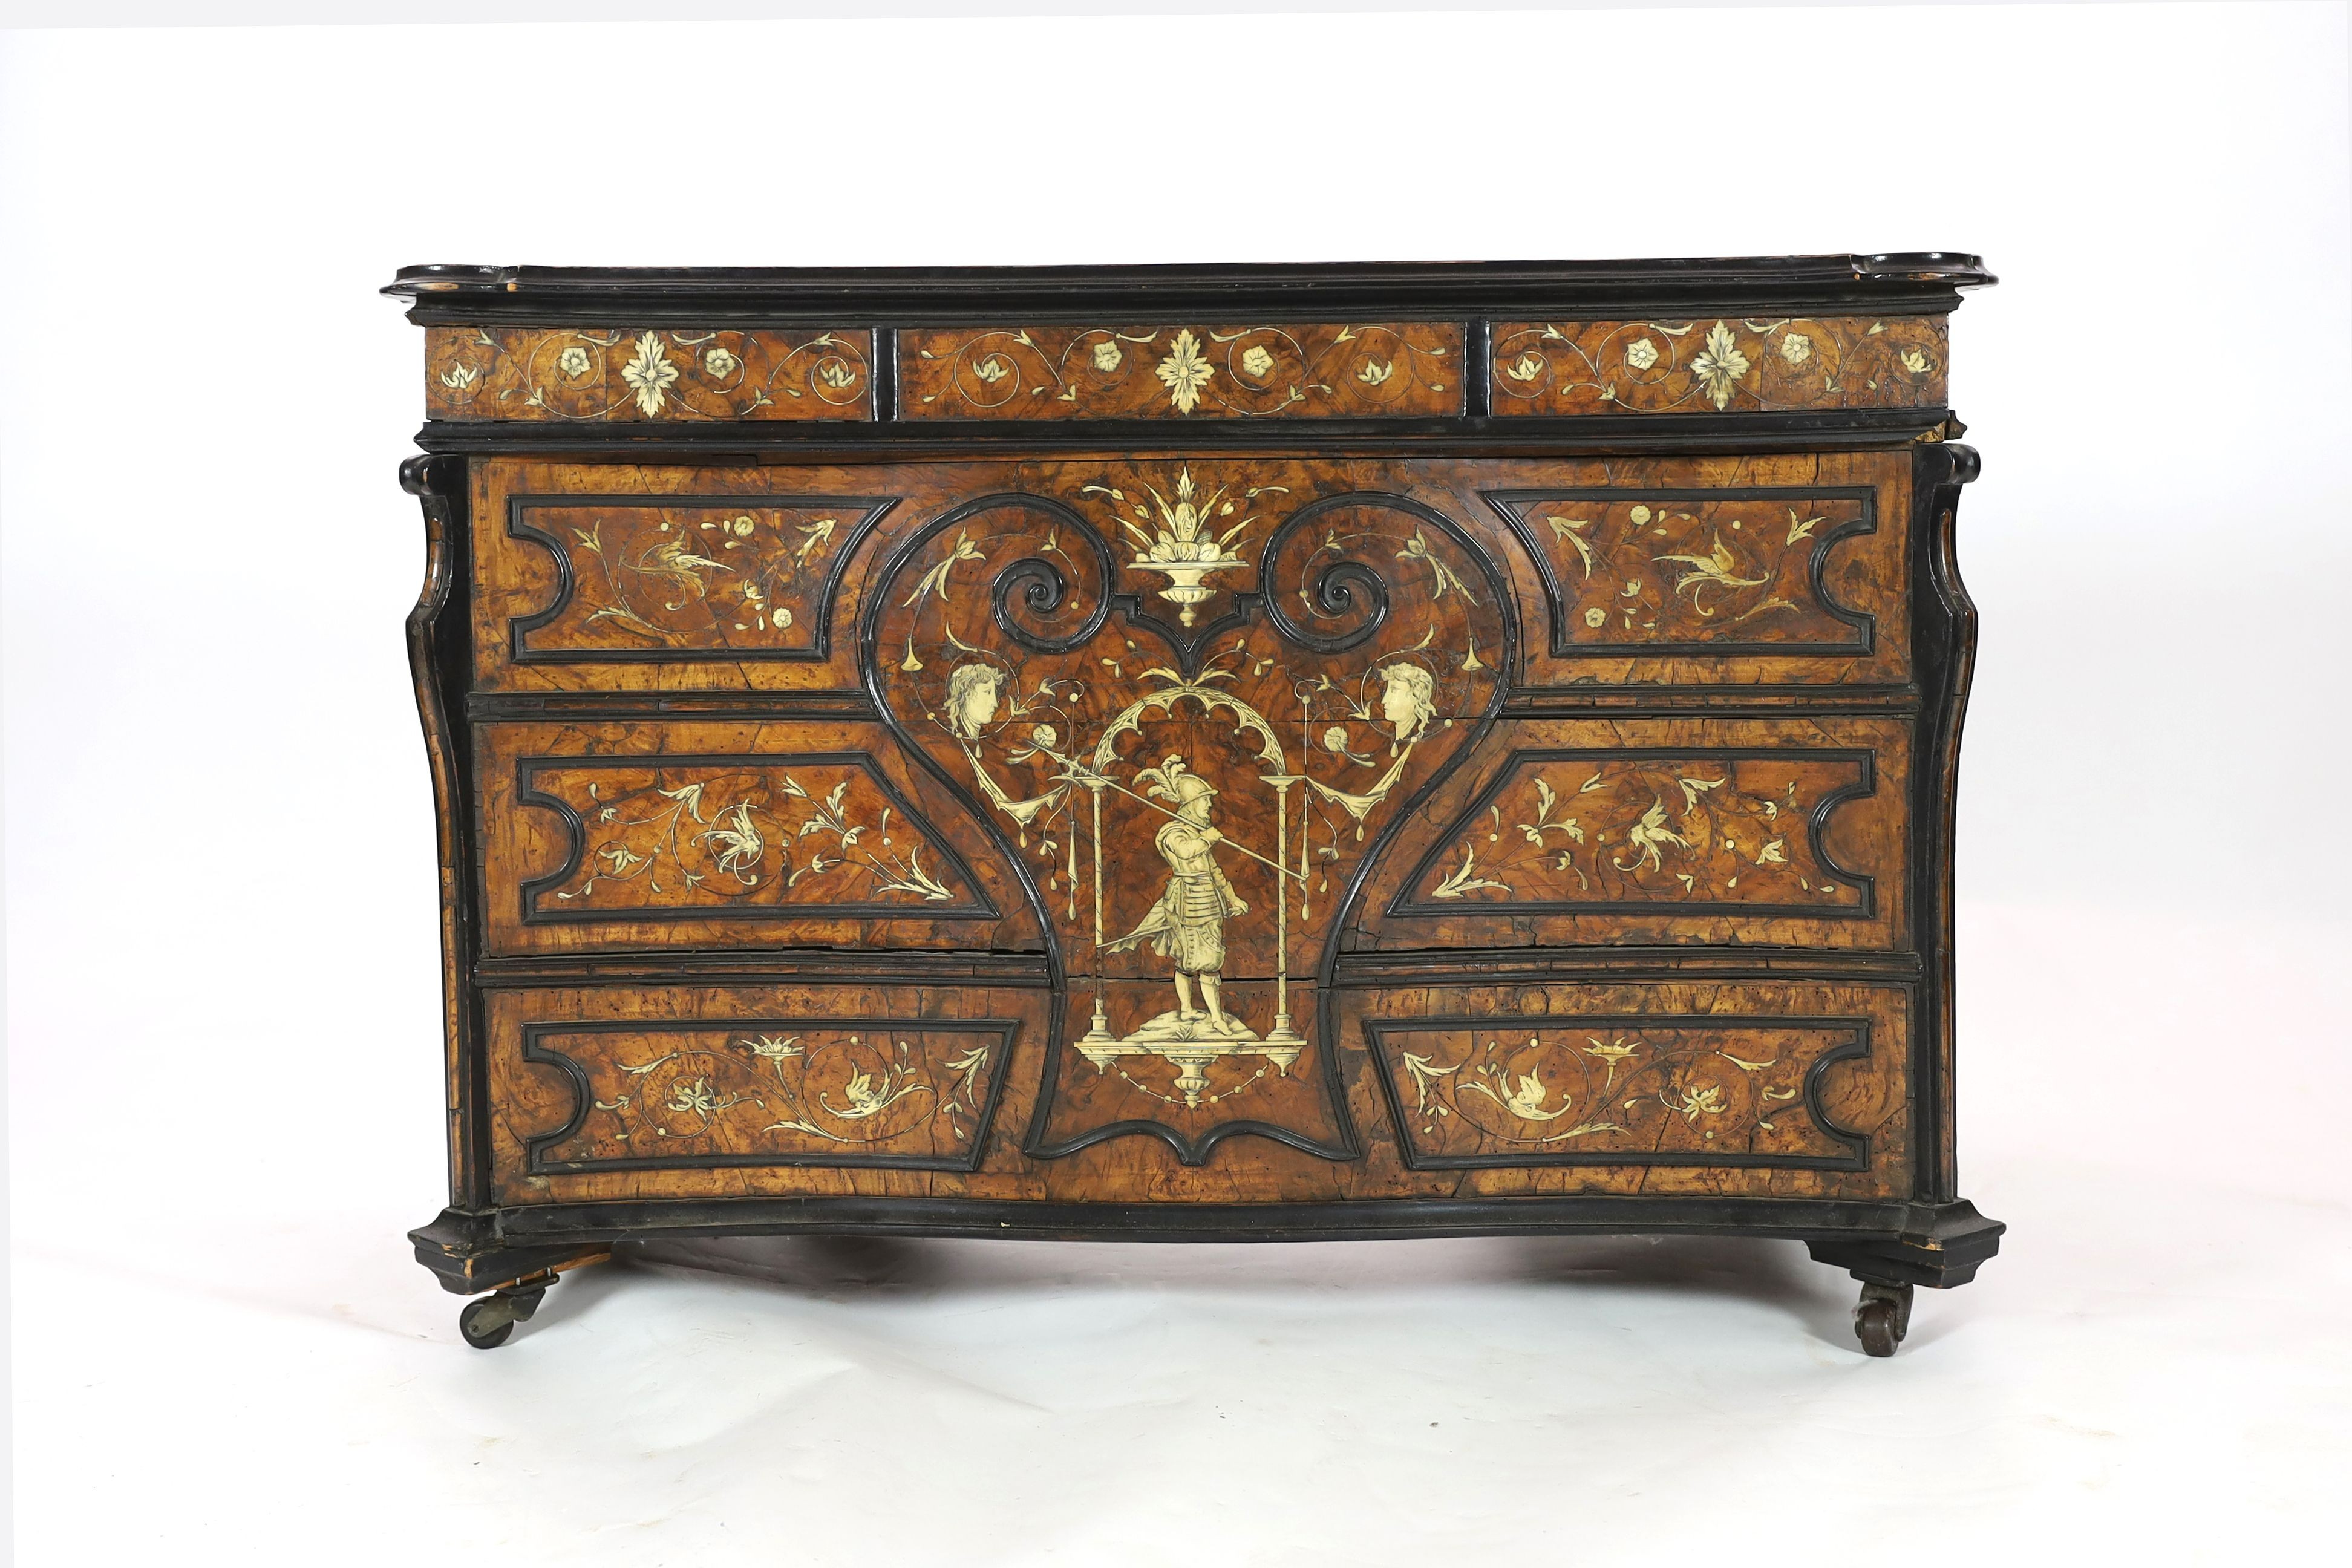 An important 18th century Lombardy ebony banded walnut and ivory inlaid twin pedestal desk, the - Image 5 of 5